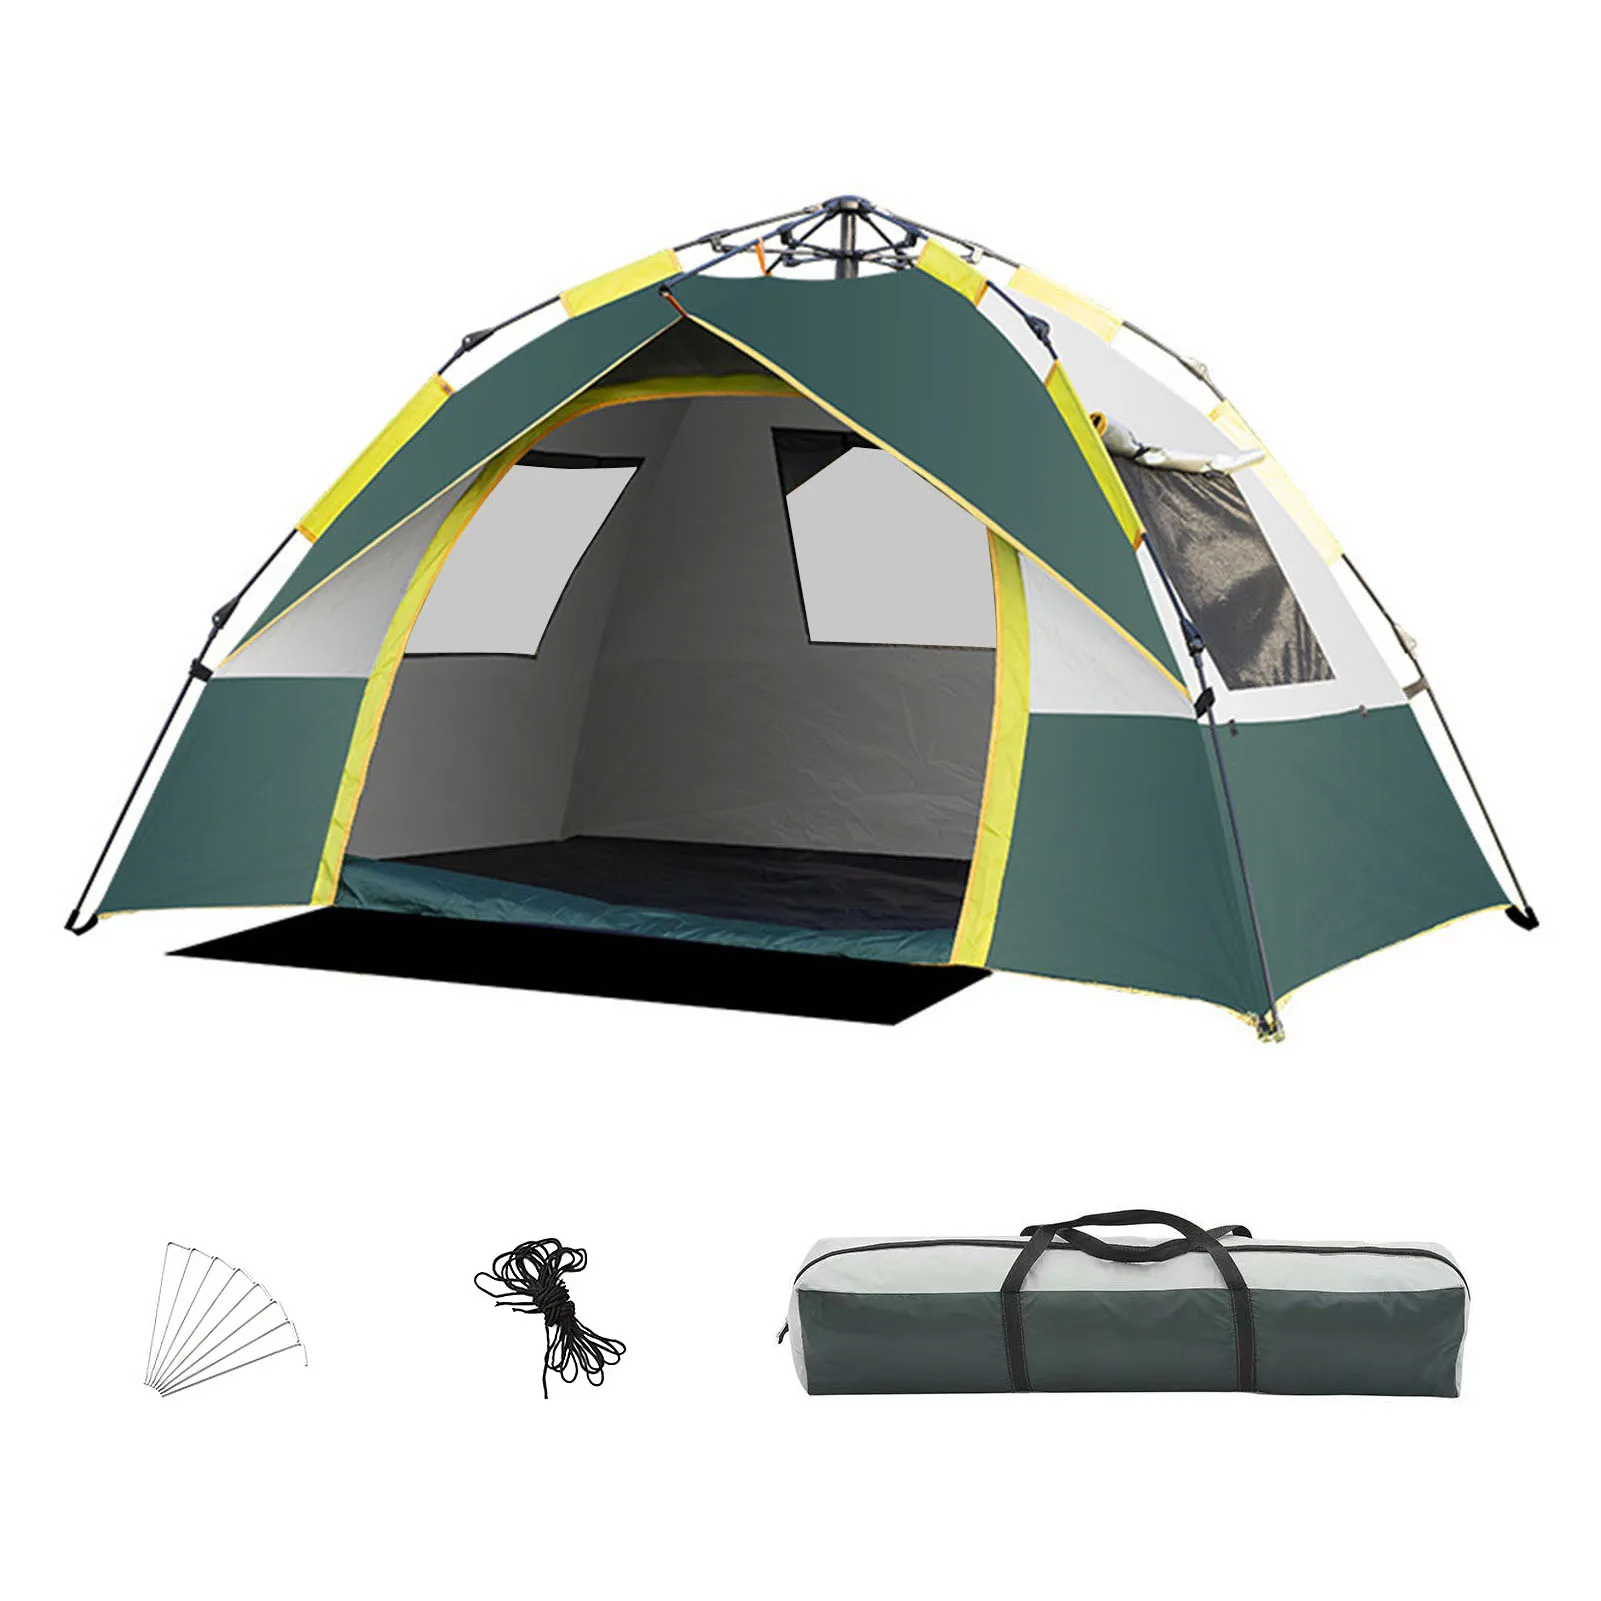 

Quick Open Tent Camping Tent 2 Doors Backpacking Tent For 2 / 3 Person Automatic Quick Opening With Double Doors & Windows Way